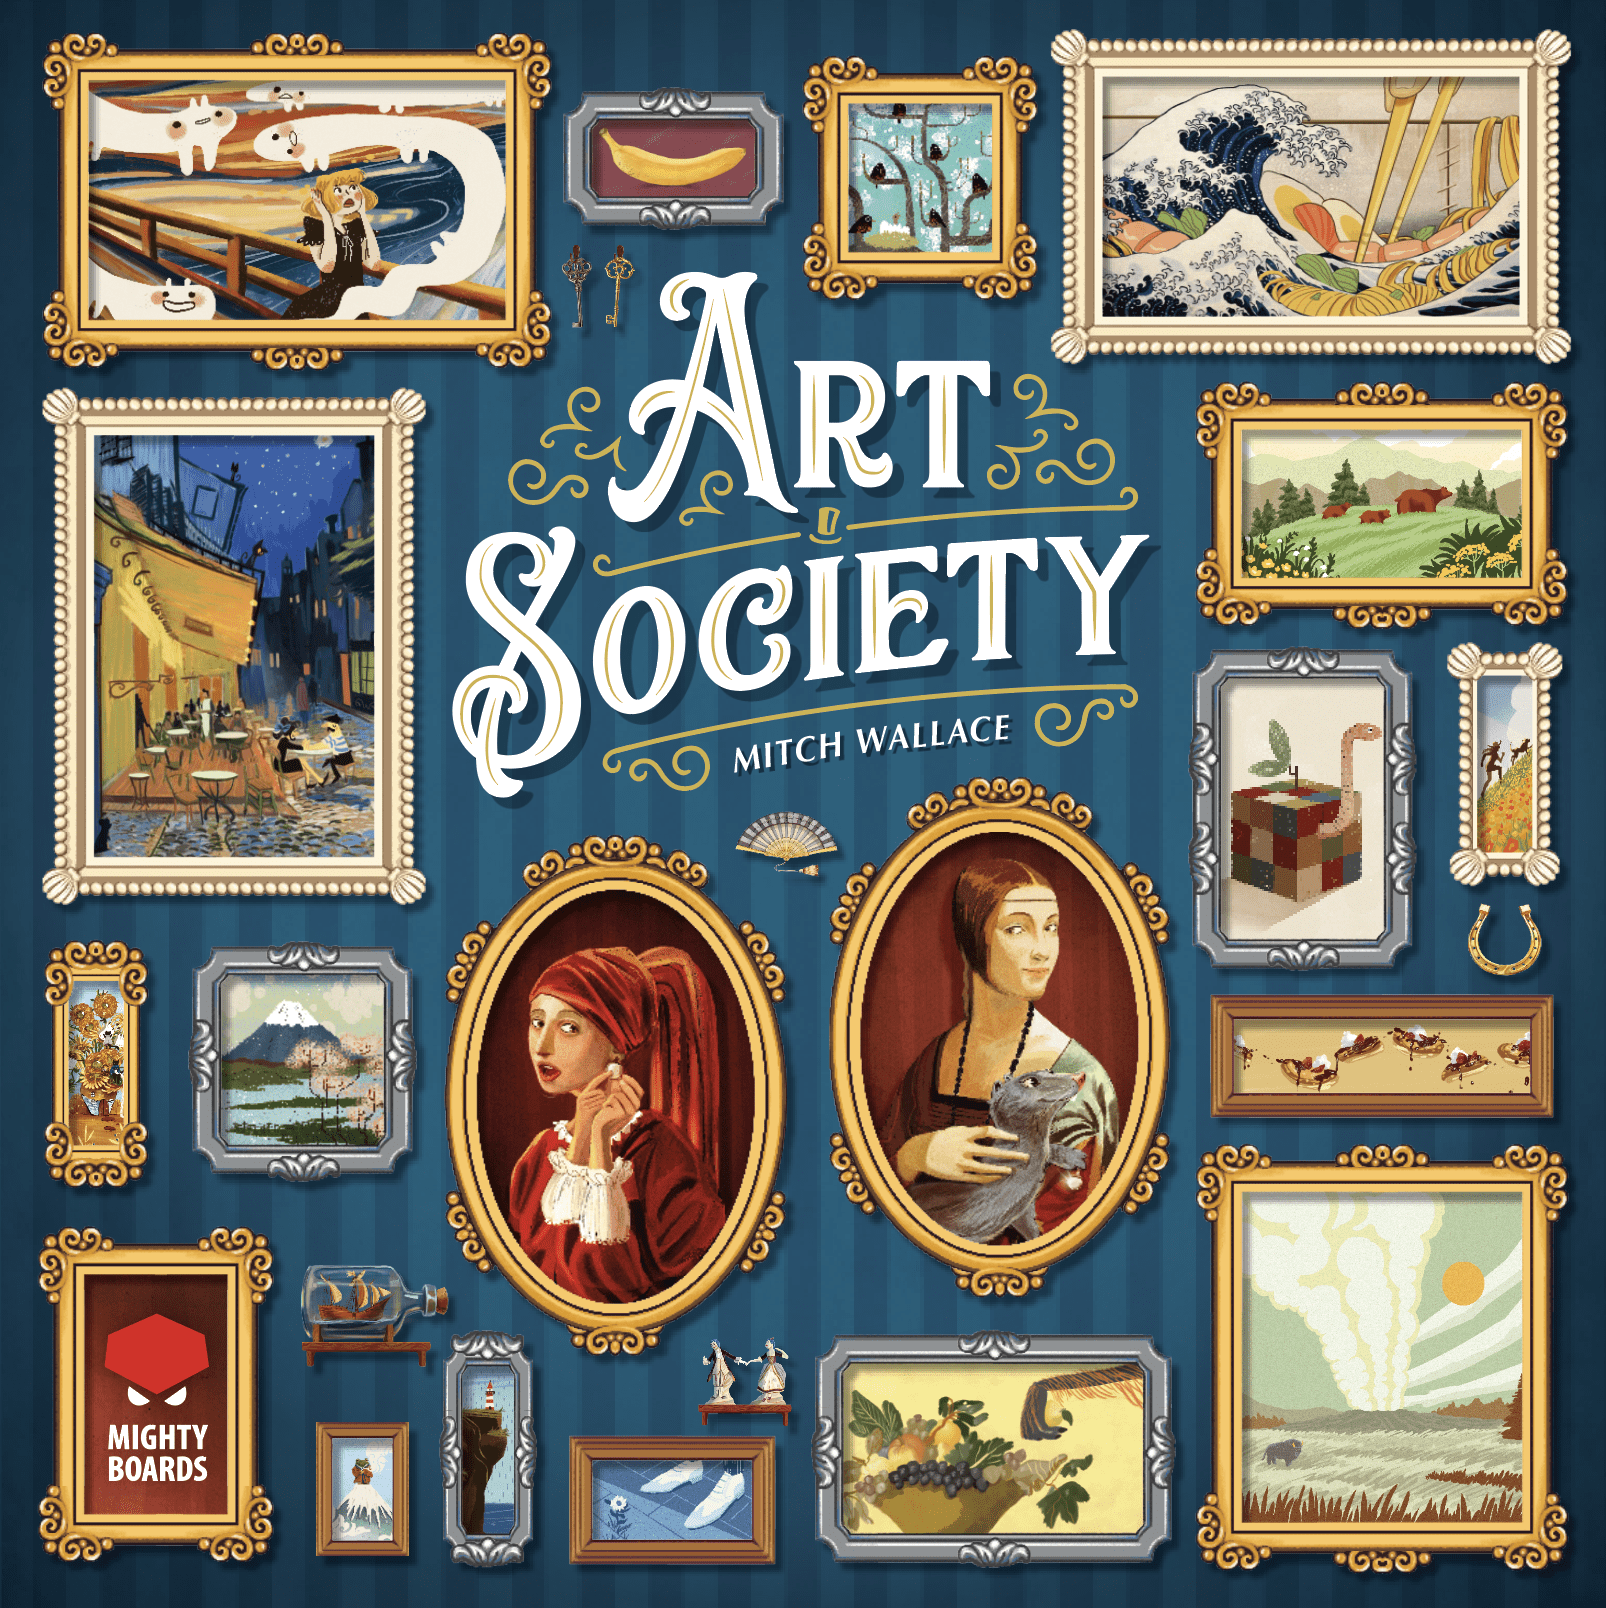 Art Society - Image Courtesy of Board Game Geek